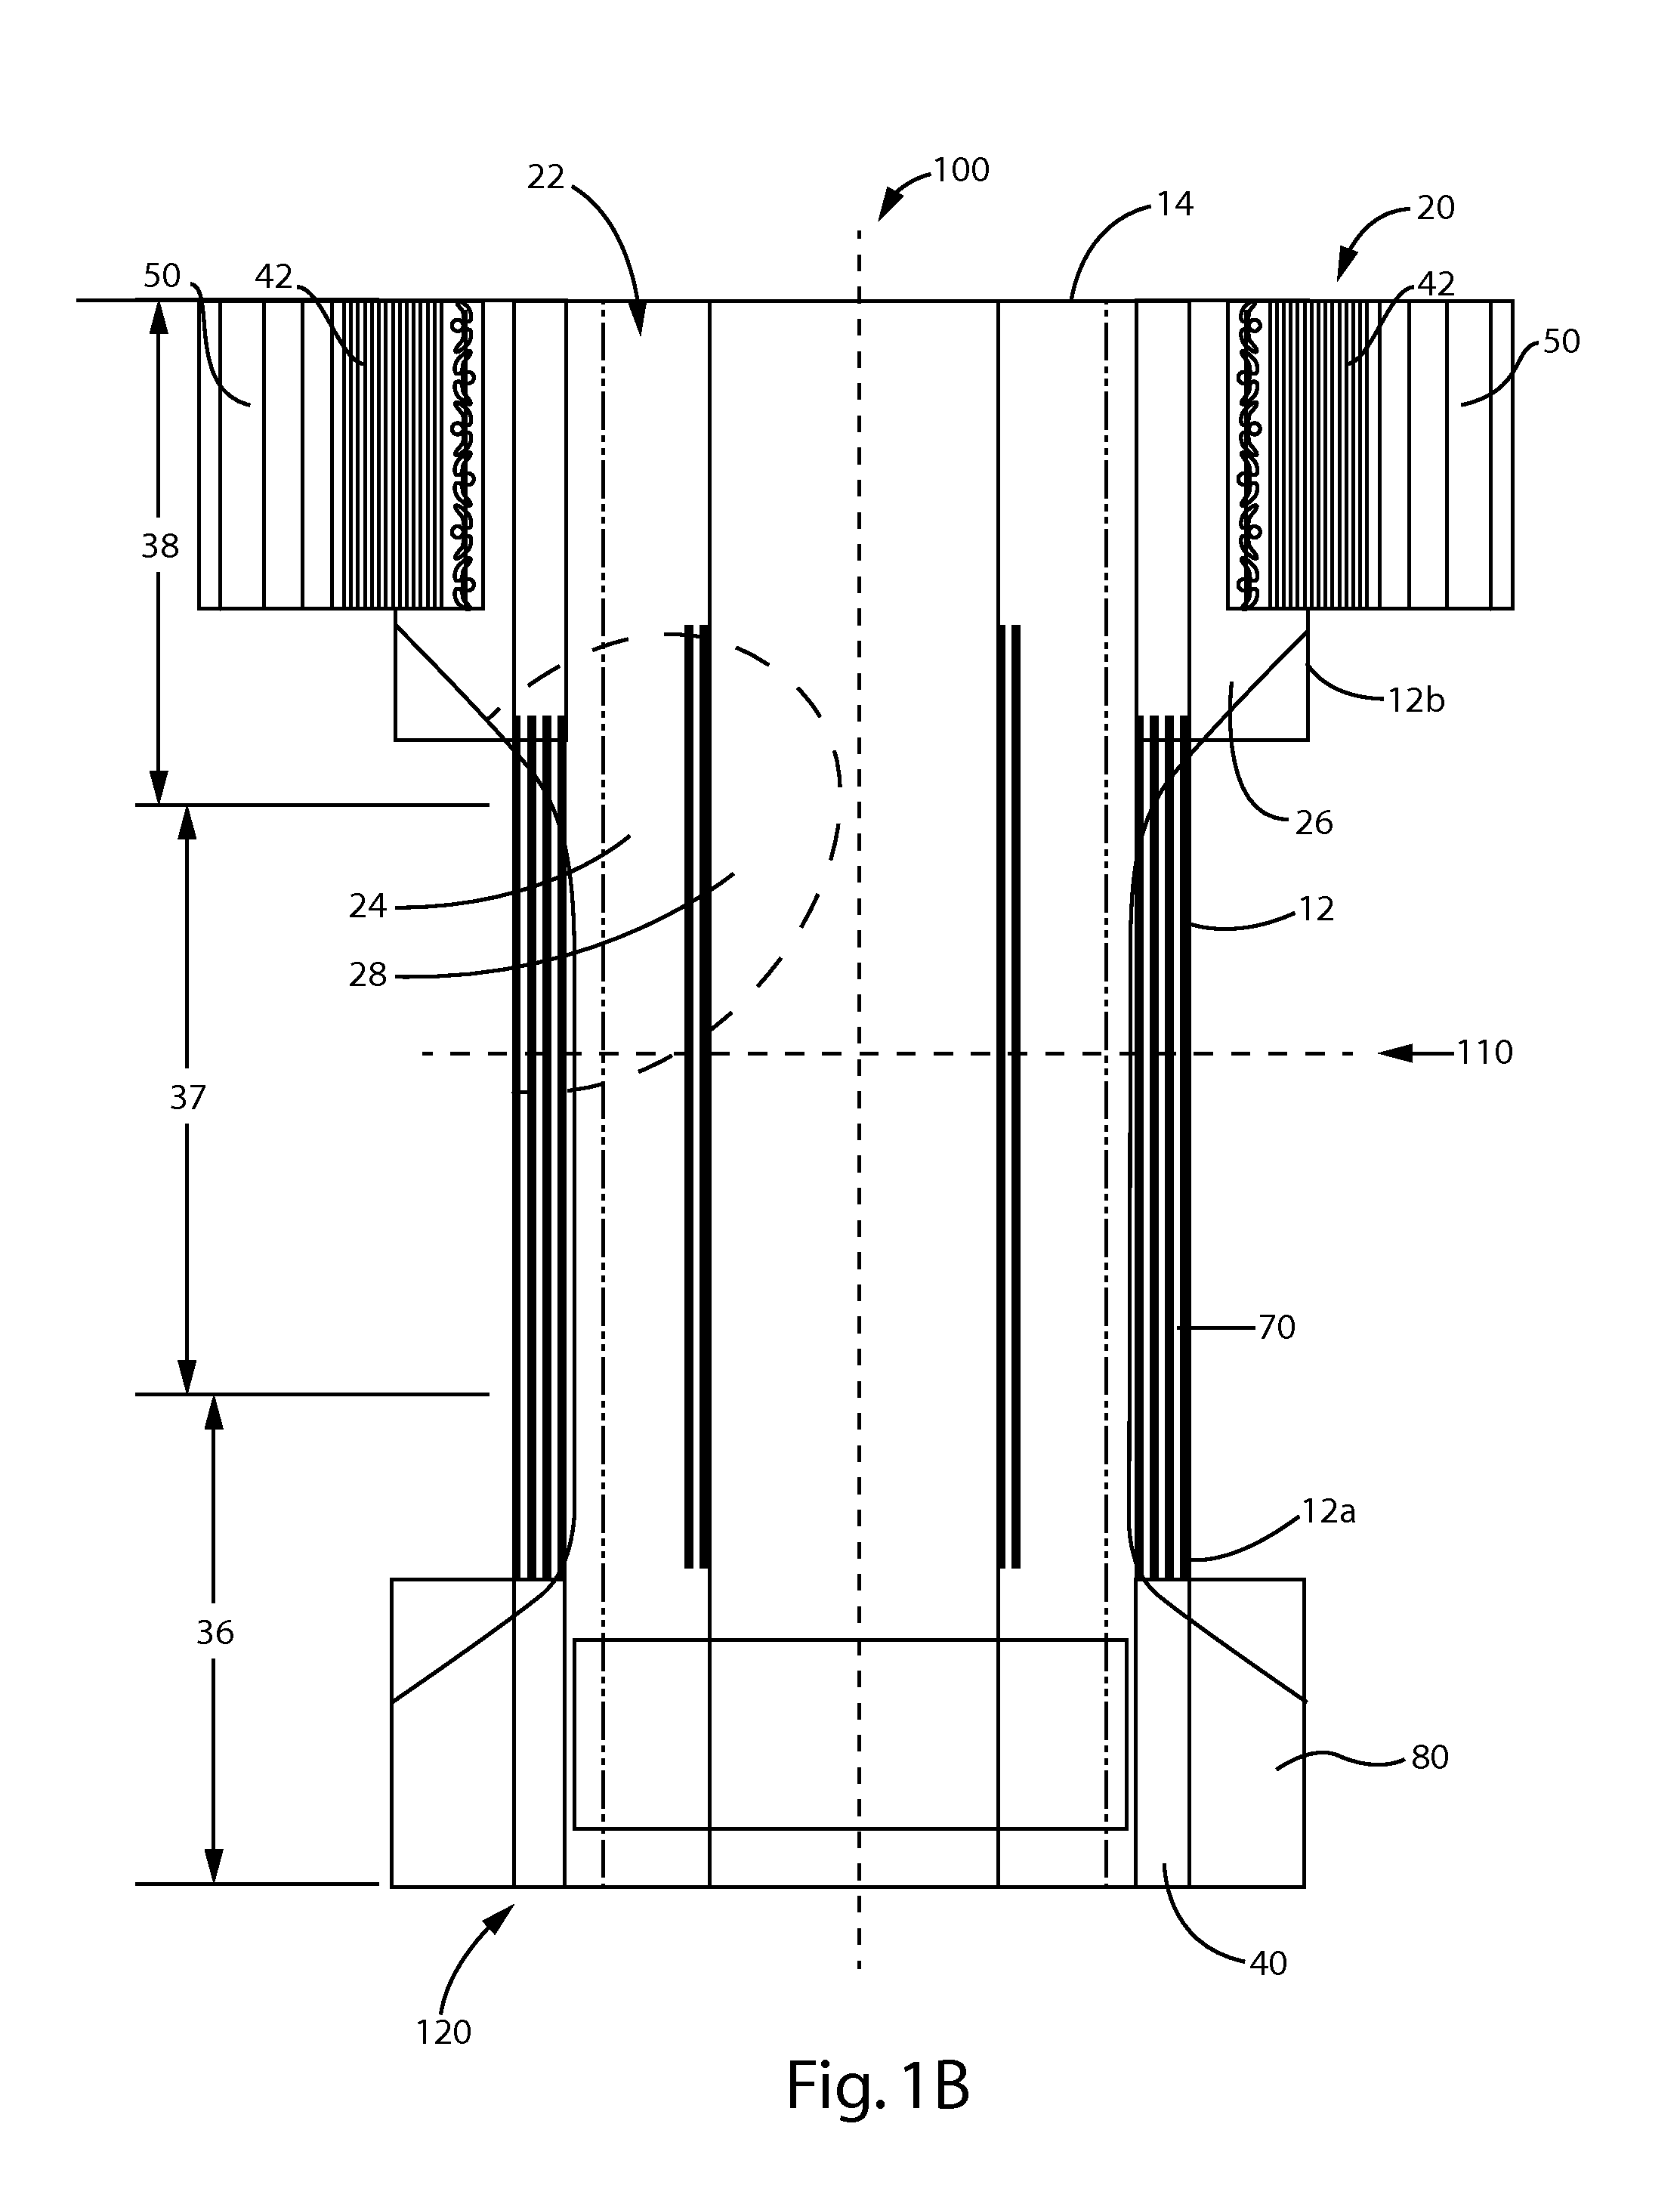 Absorbent articles comprising substantially identical chassis